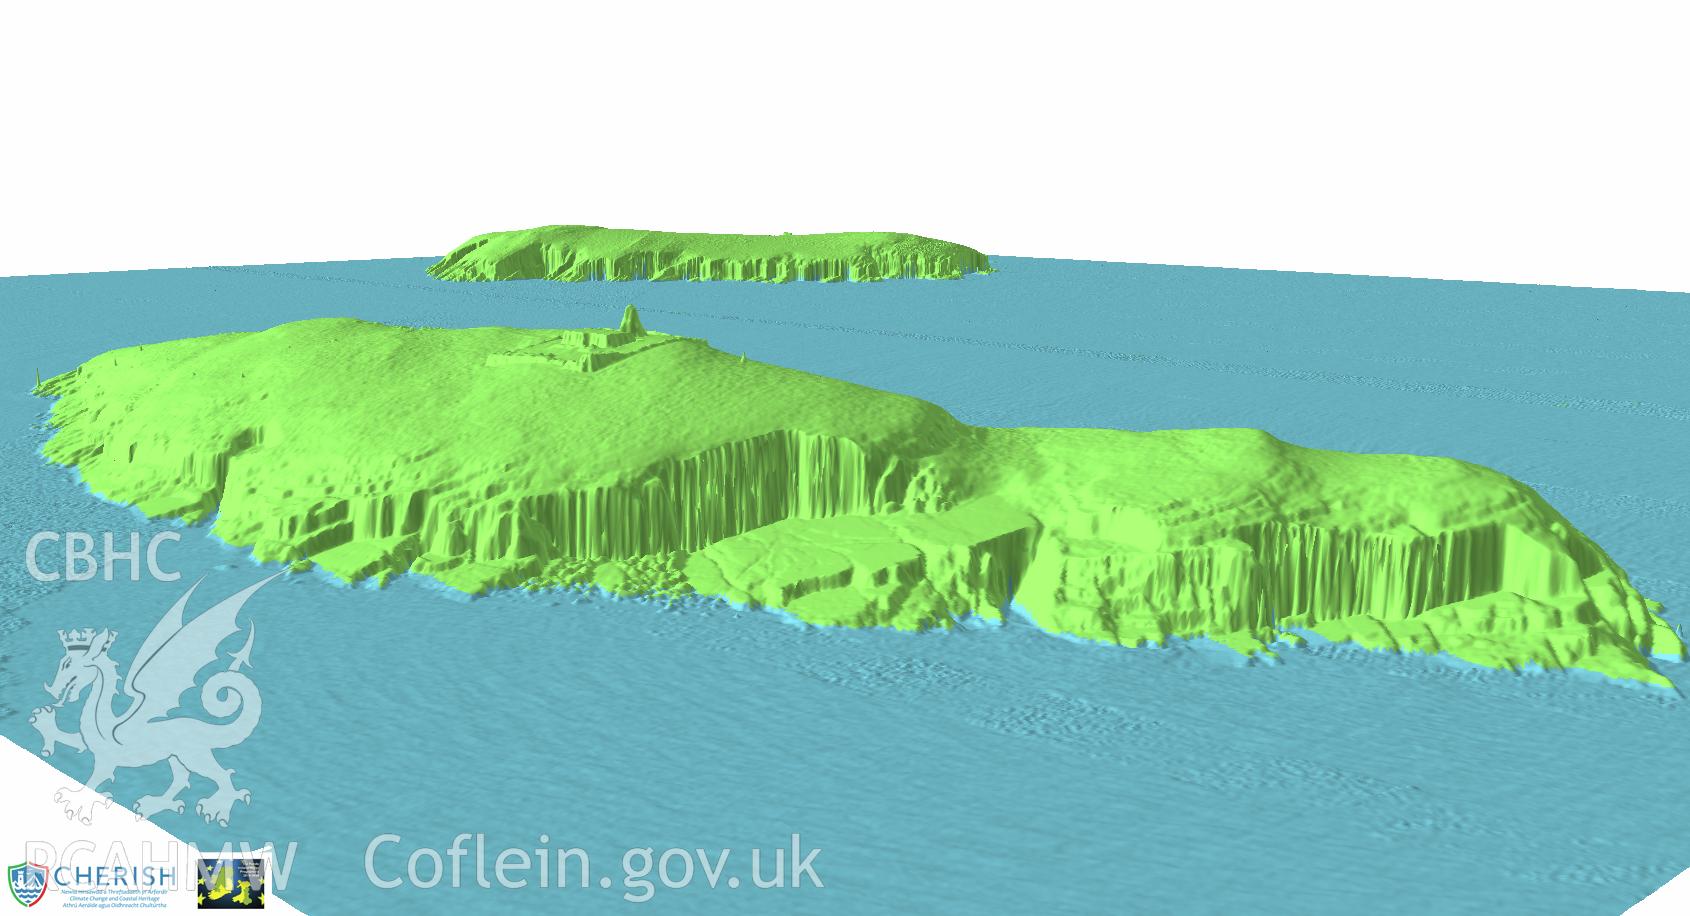 Ynysoedd Tudwal (St. Tudwal?s Islands). Airborne laser scanning (LiDAR) commissioned by the CHERISH Project 2017-2021, flown by Bluesky International LTD at low tide on 24th February 2017. View showing both islands from the west island looking out towards the east.